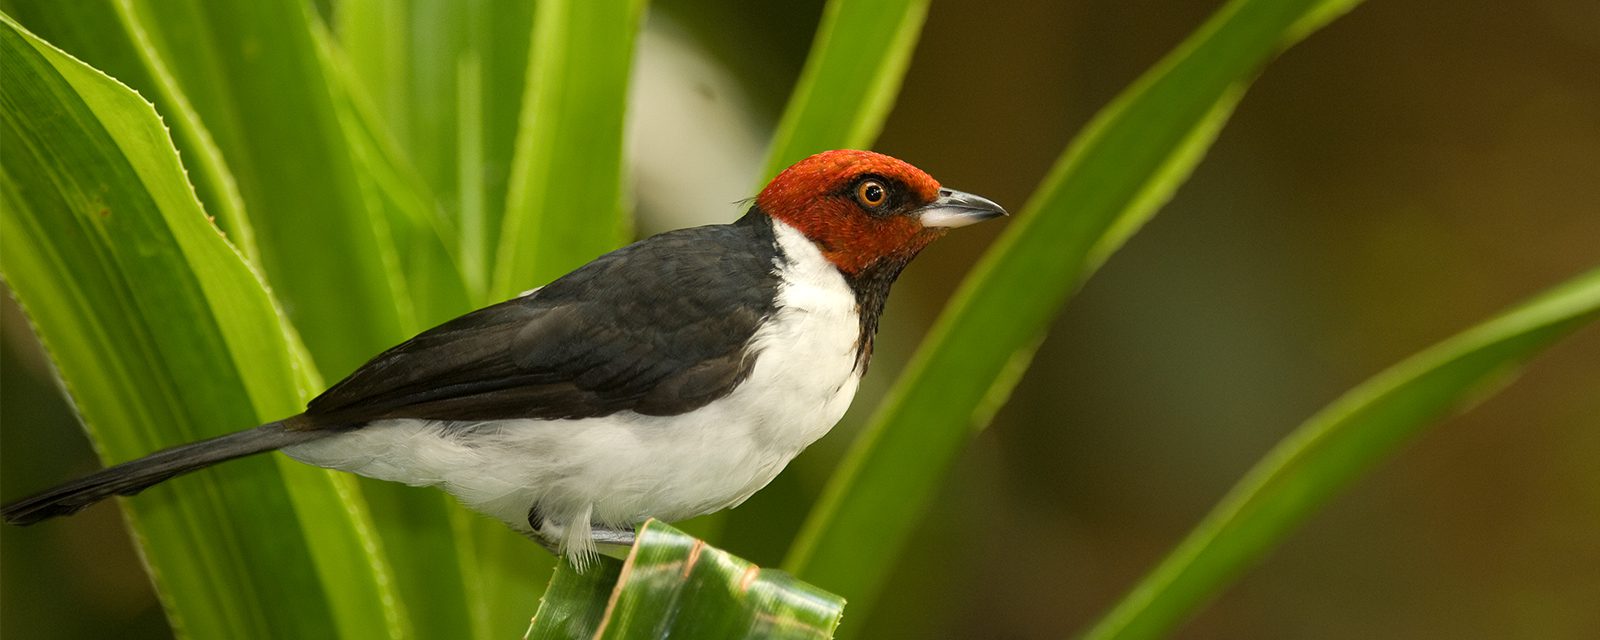 Red-capped cardinal in exhibit